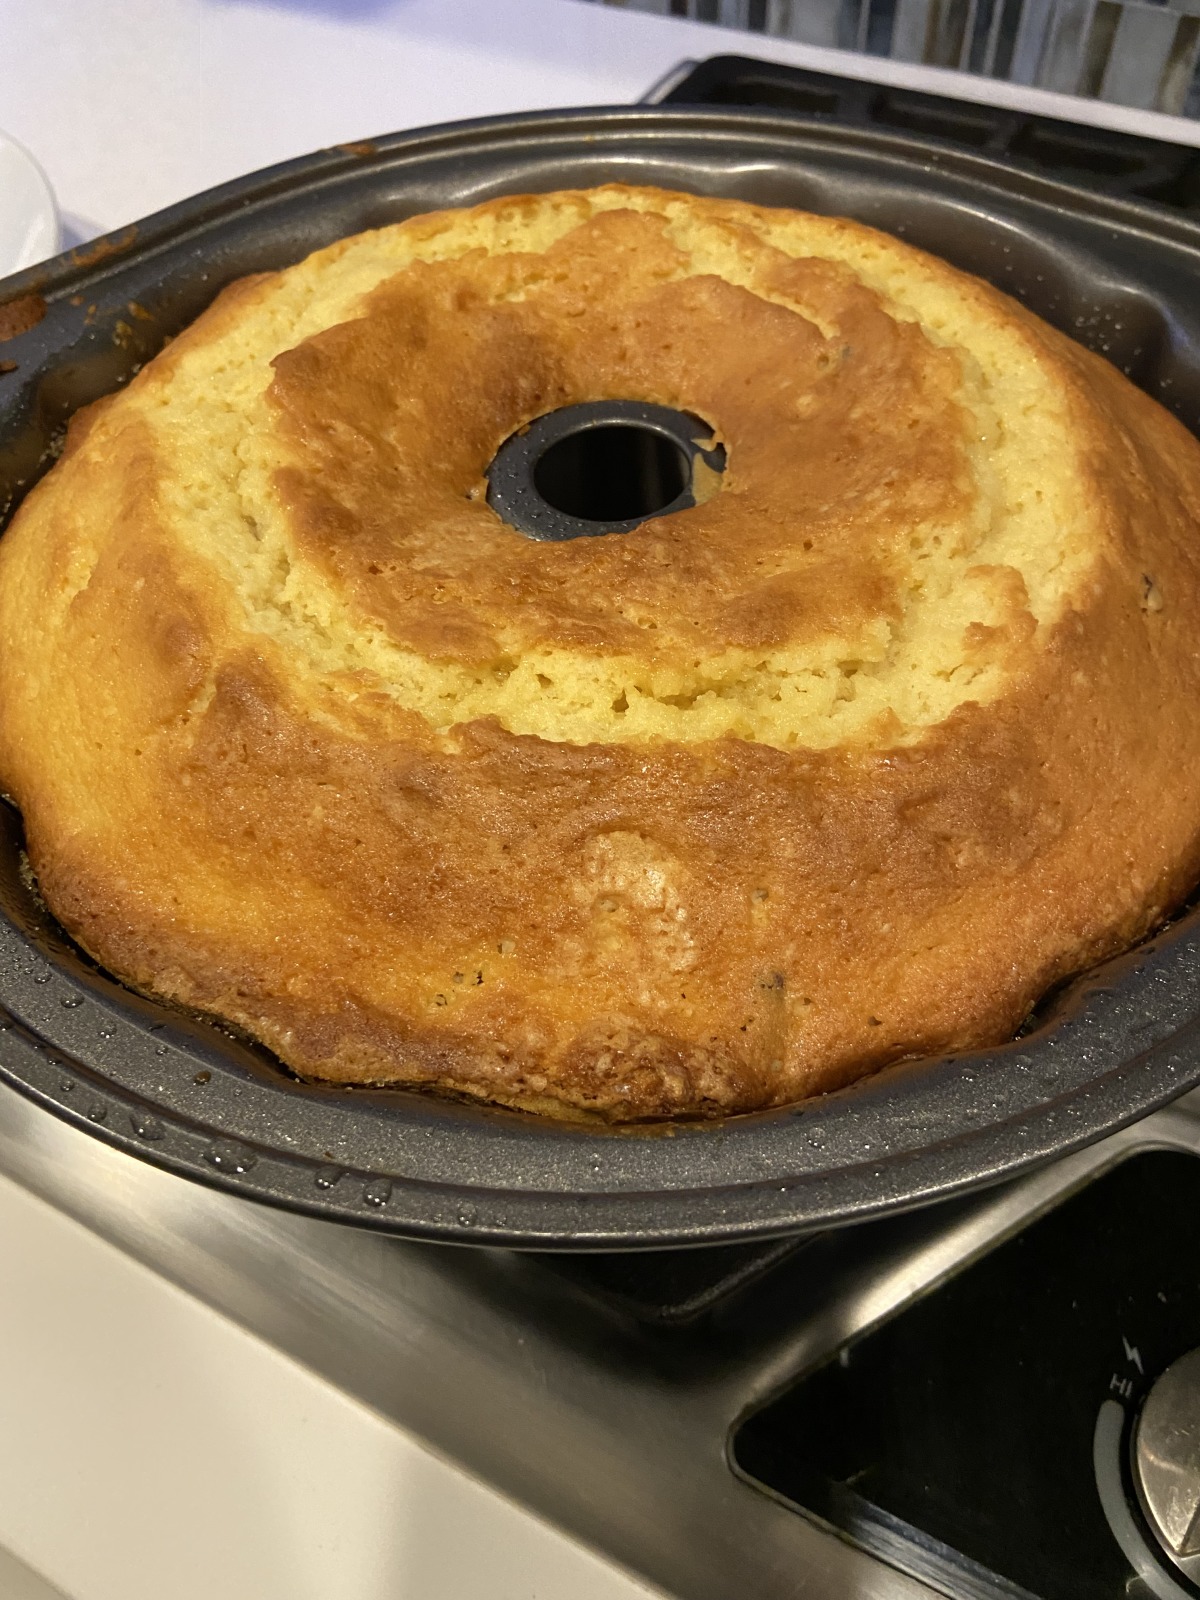 Easy Lemon Crunch Cake with a Cake Mix - Quick and Easy Baking